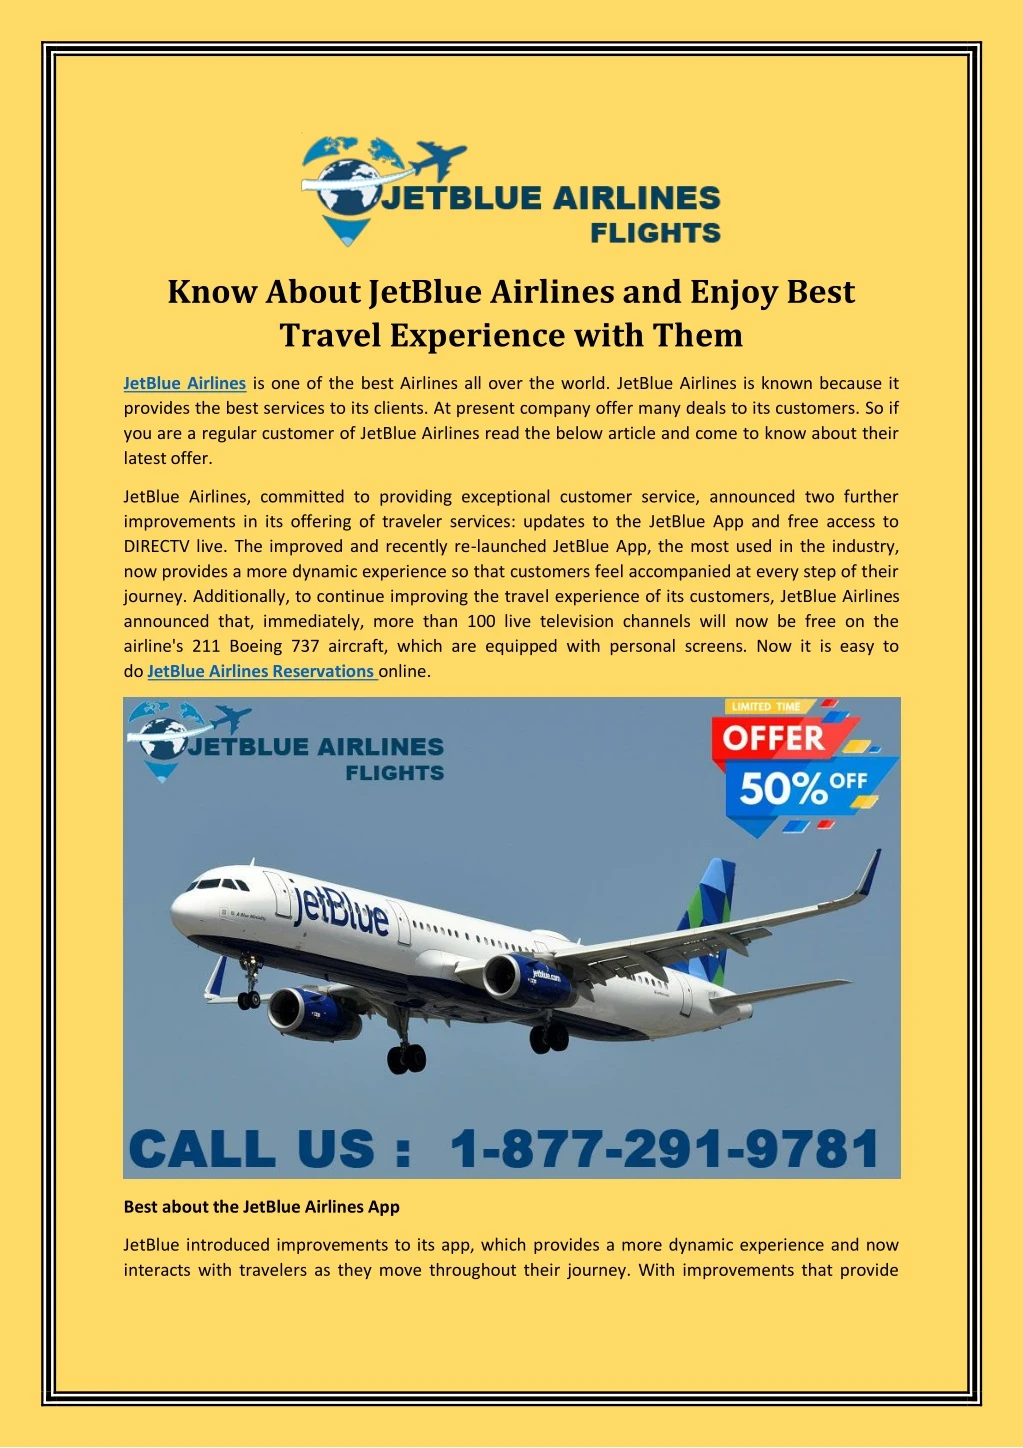 know about jetblue airlines and enjoy best travel